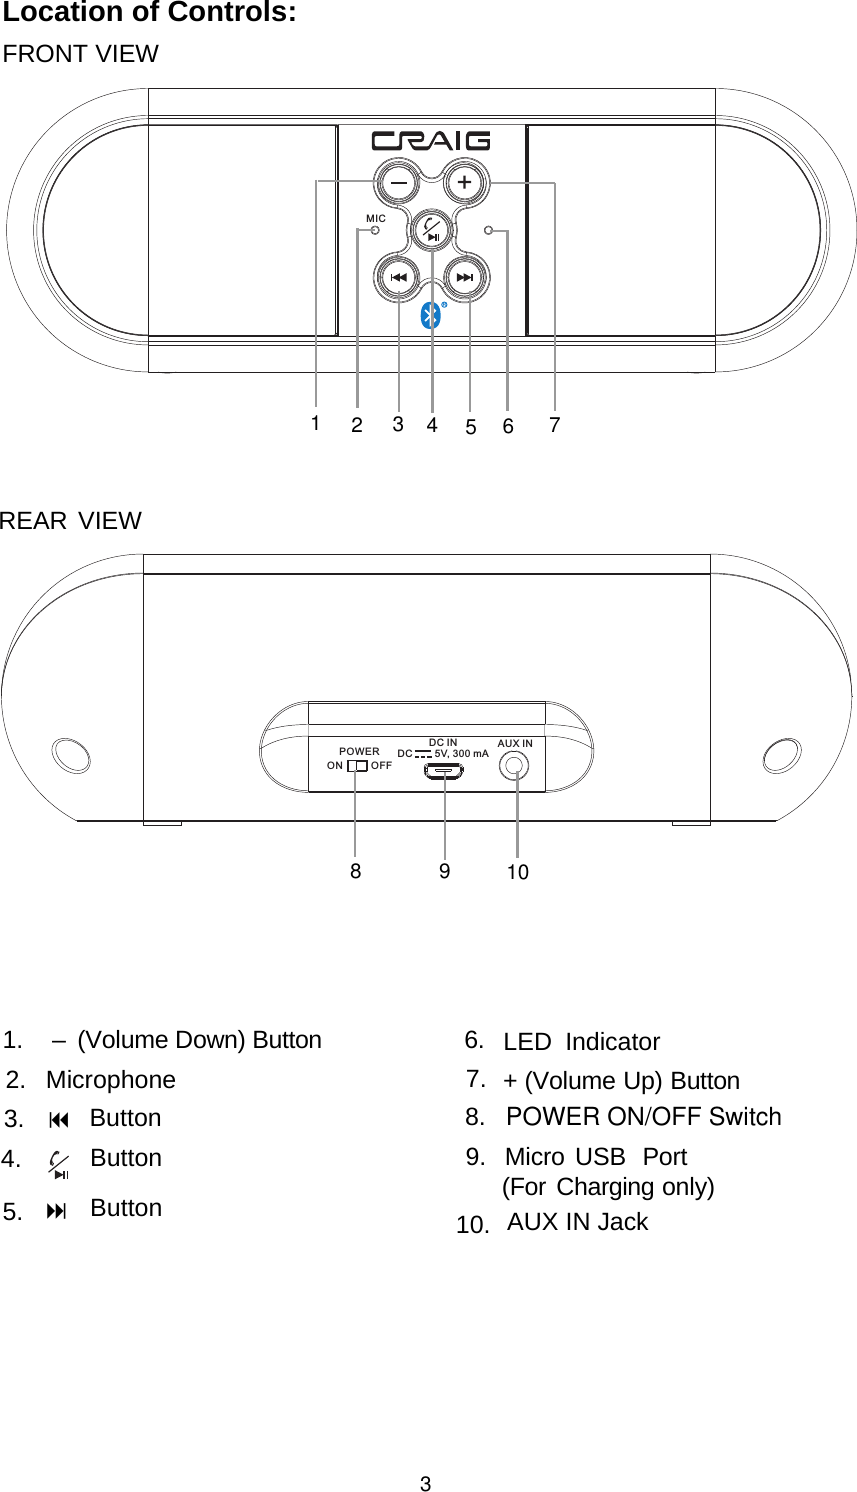 Location of Controls:FRONT VIEW4.2.3.7.310.  POWER ON/OFF SwitchMIC123456AUX INON       OFFDC INDC        5V, 300 mAPOWER10895.LED Indicator8.Microphone71.   (Volum e   Down)  Button 6.+ (Volume Up) Button9. Micro USB Port(For Charging only)AUX IN JackREAR VIEW–ButtonButtonButton